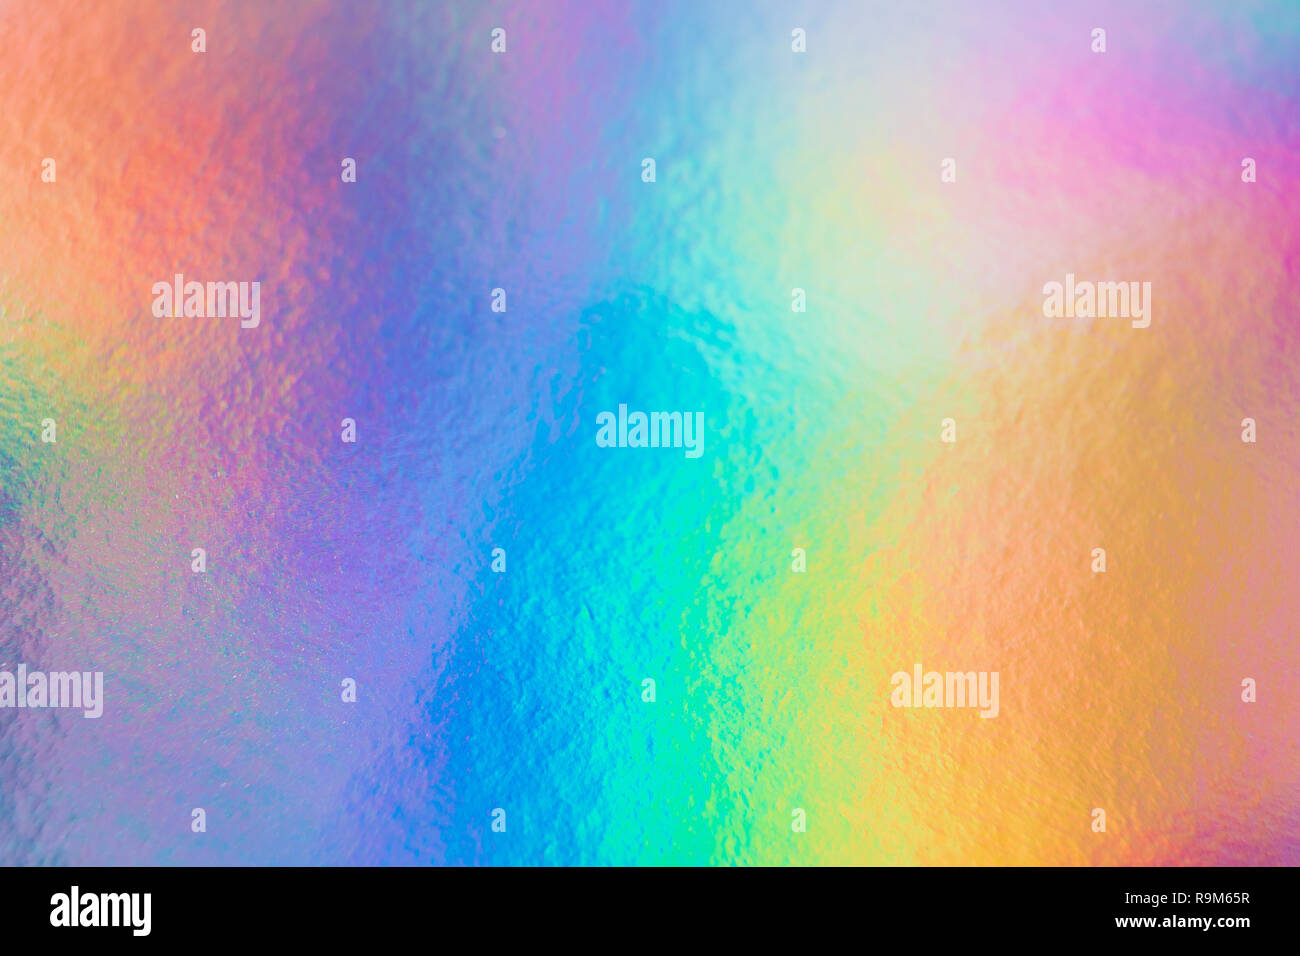 colorful holographic paper with rainbow lights. Stock Photo